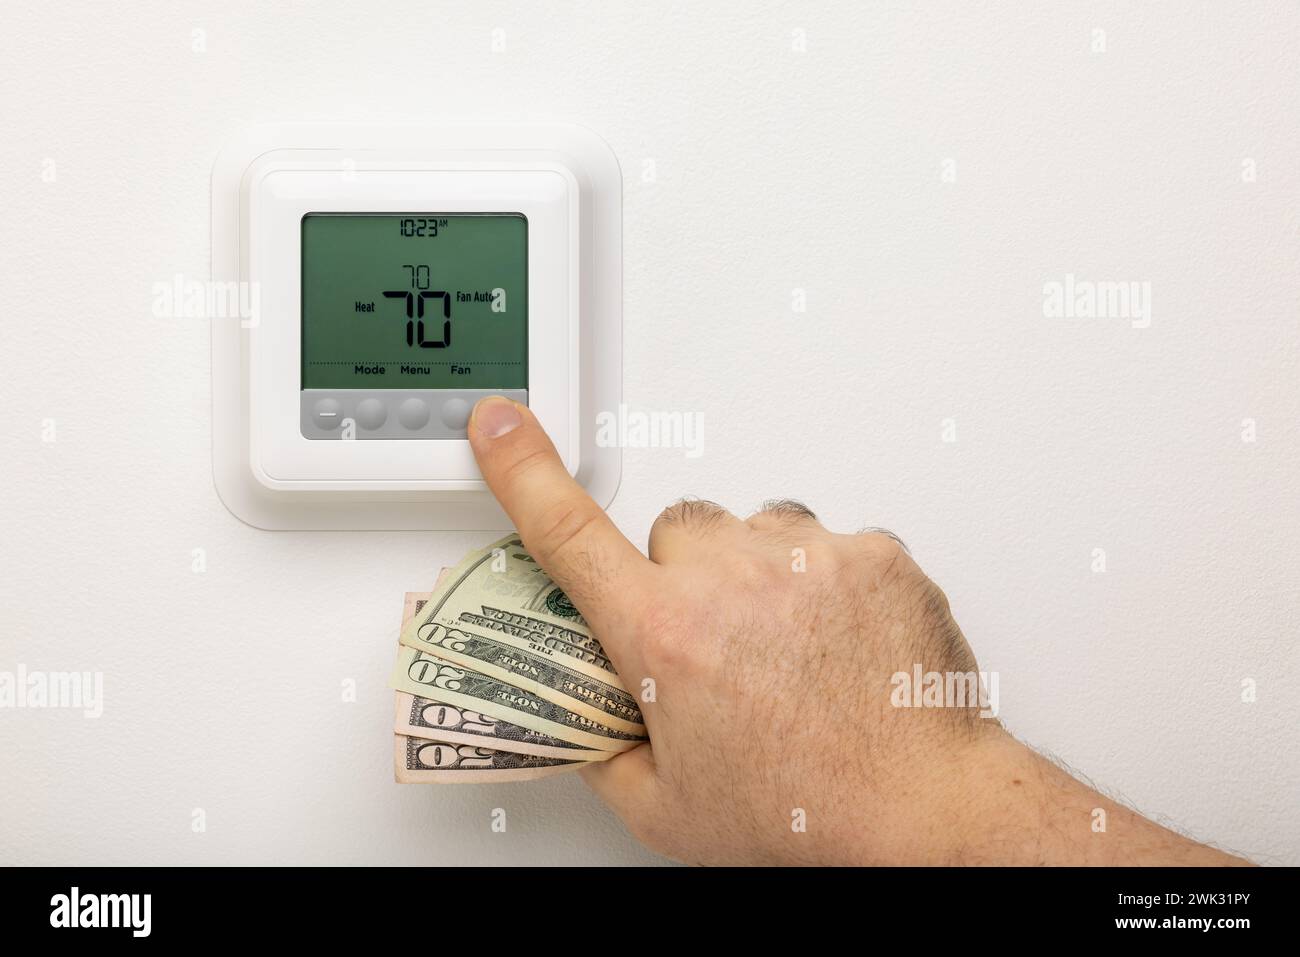 A hand holding money adjusting a thermostat. Stock Photo